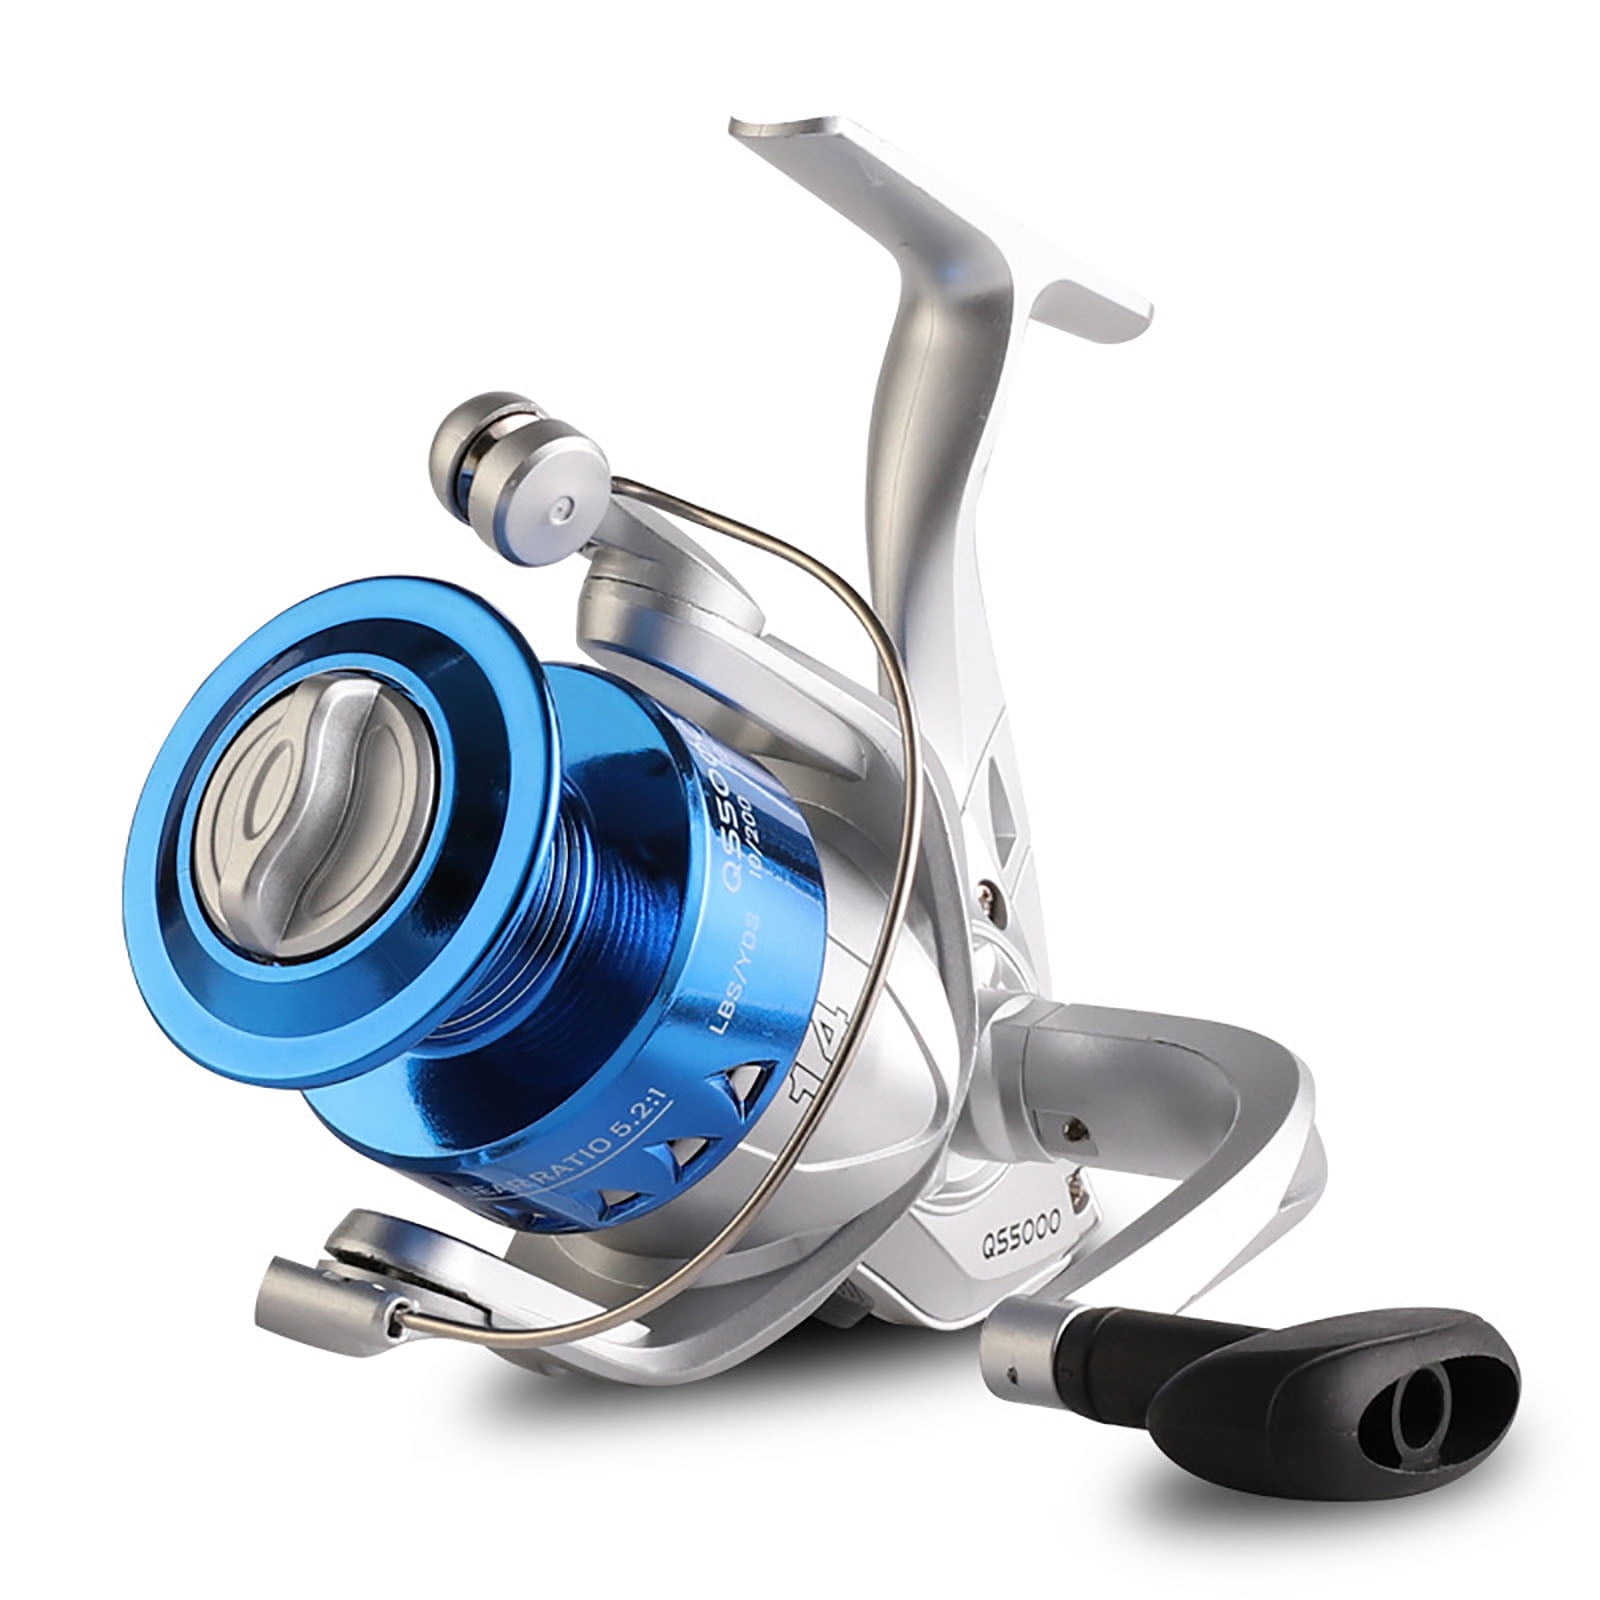 Lure Spinning Fishing Reel Max Drag 5kg Gear Ratio 5.2:1 1000-7000 Spinning  Reel Fishing Tackle Accessories 